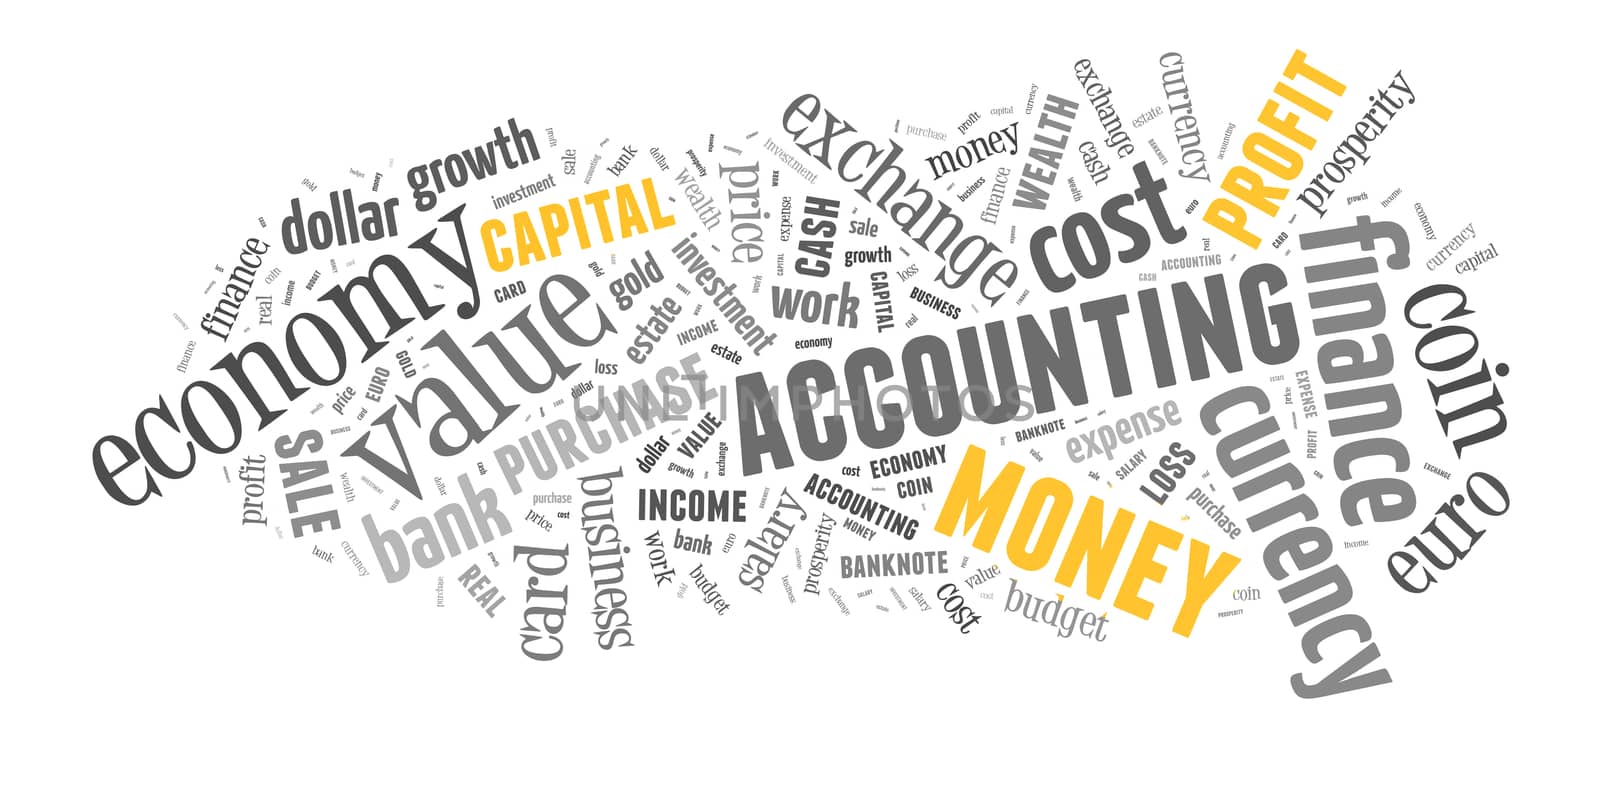 wordcloud illustration of finance and business words by artush